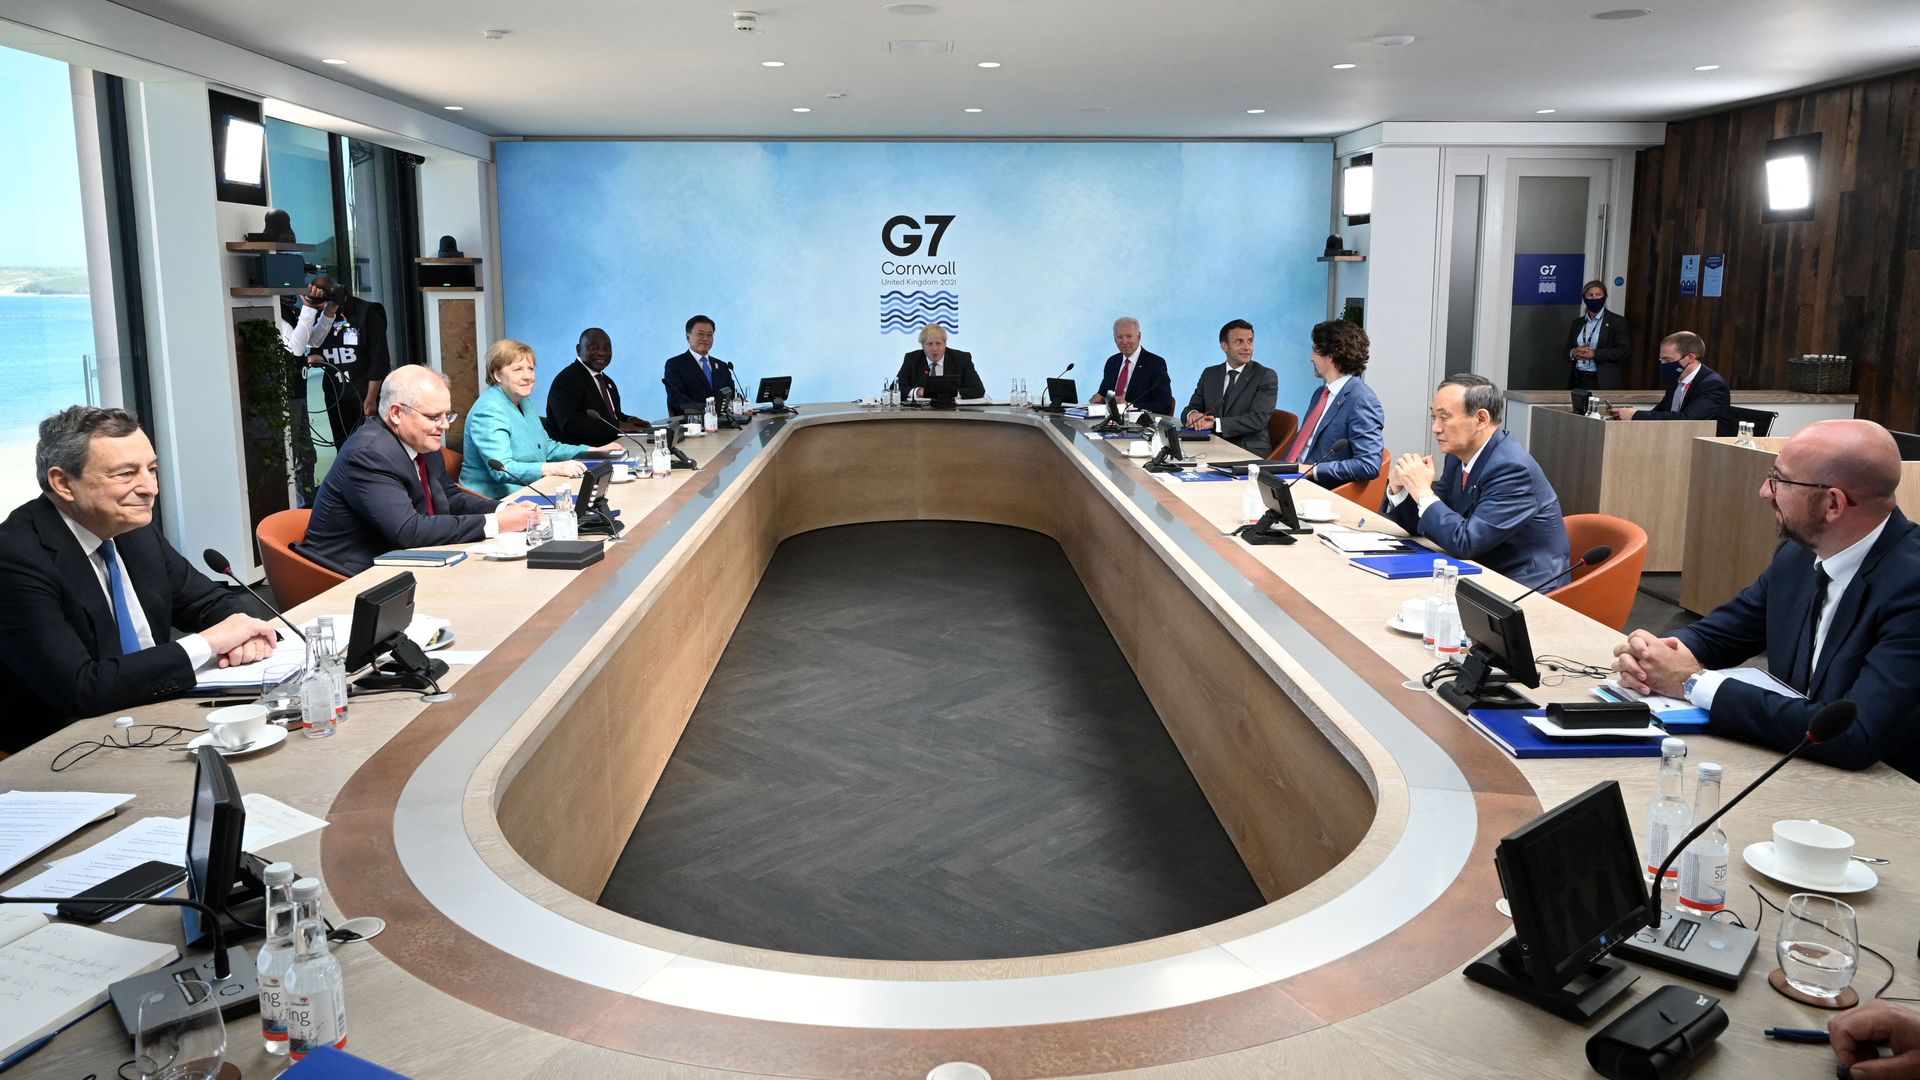 Leaders of the G7 at a working session in Carbis Bay, Cornwall on June 12.